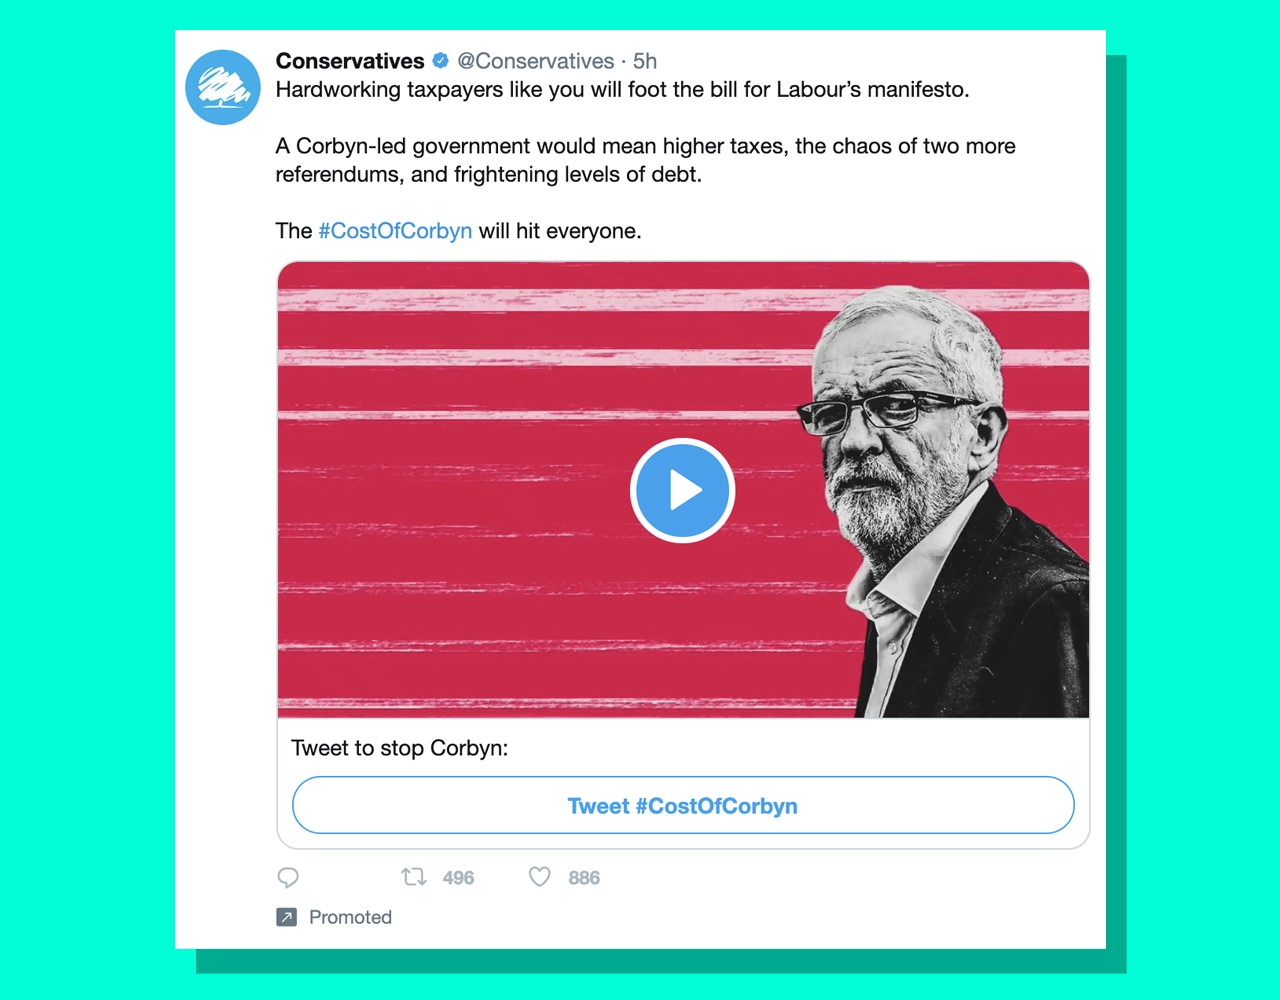 Twitter ad placed by the Conservatives. The image shows Jeremy Corbyn and says: "Tweet to stop Corbyn".